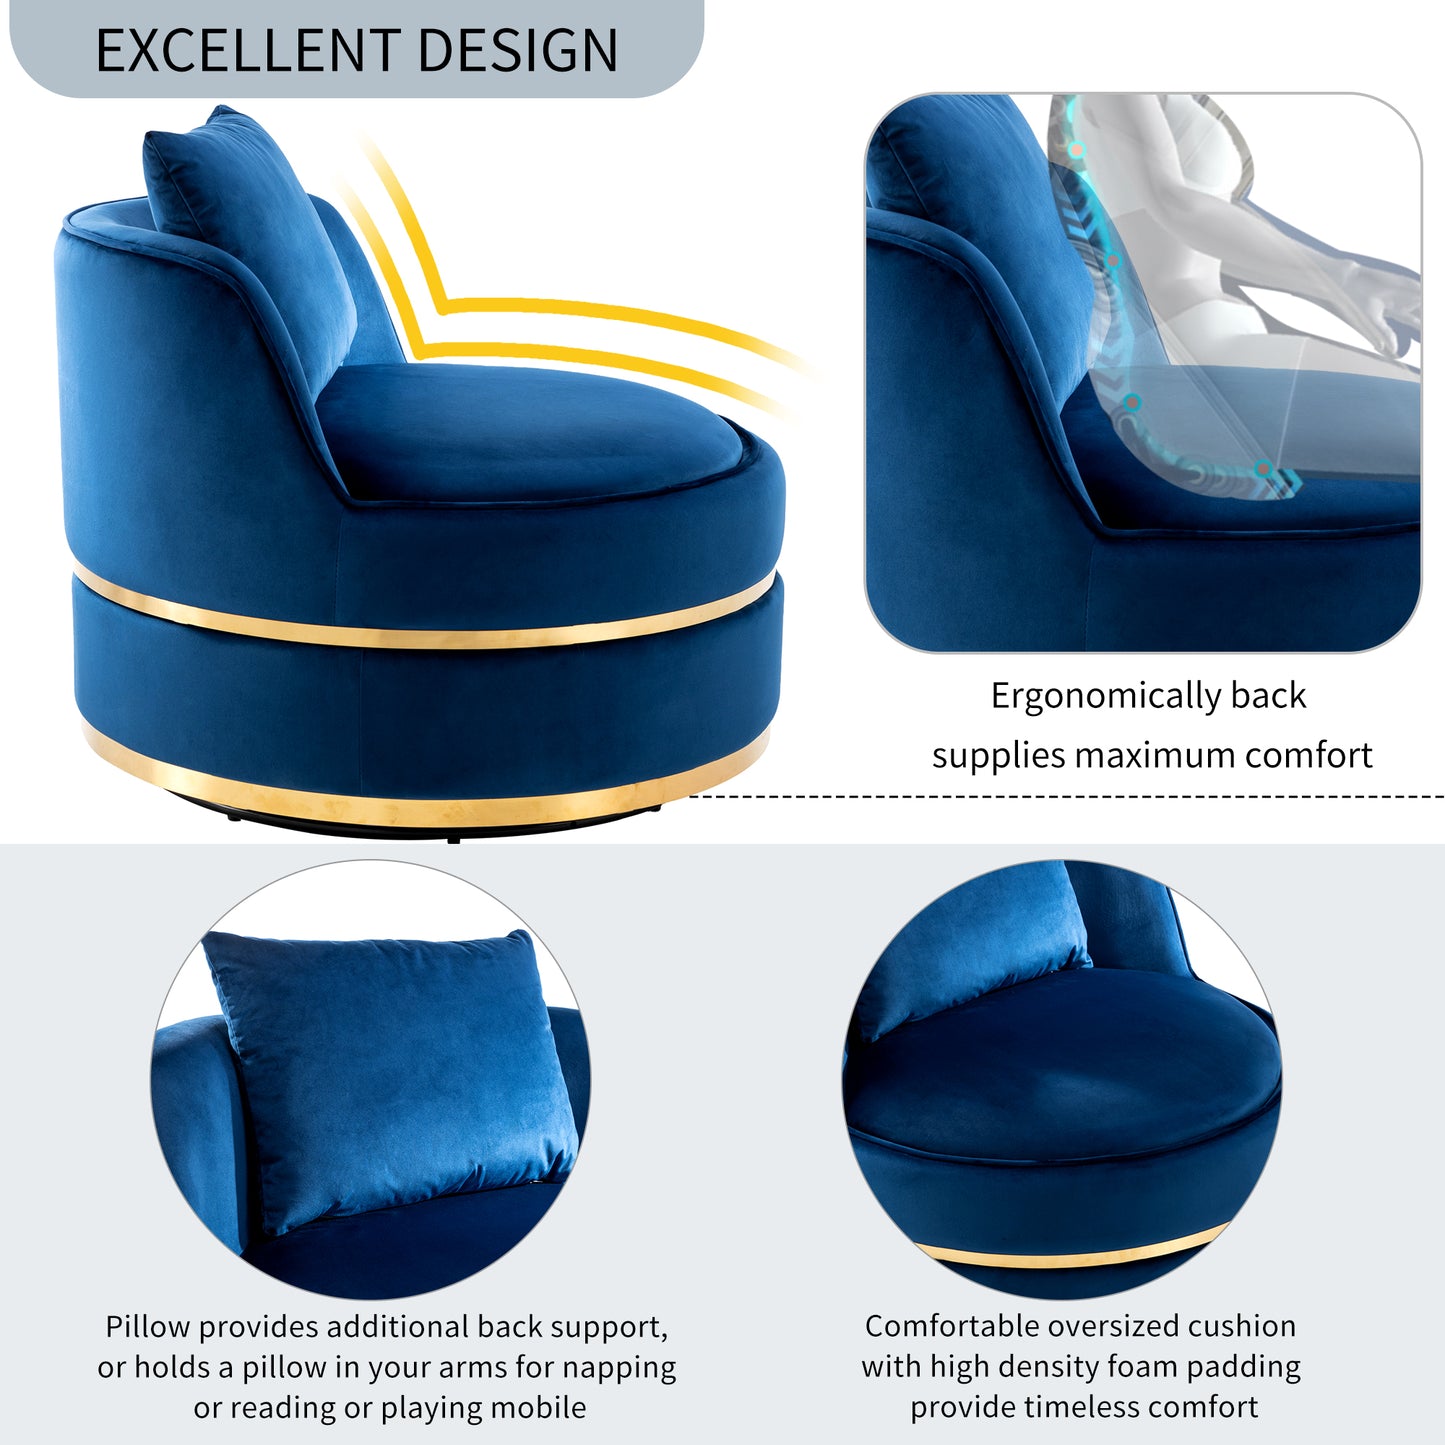 360 Degree Swivel Velvet Accent Chair, Barrel Chair Over-Sized Soft Chair with Seat Cushion, Blue